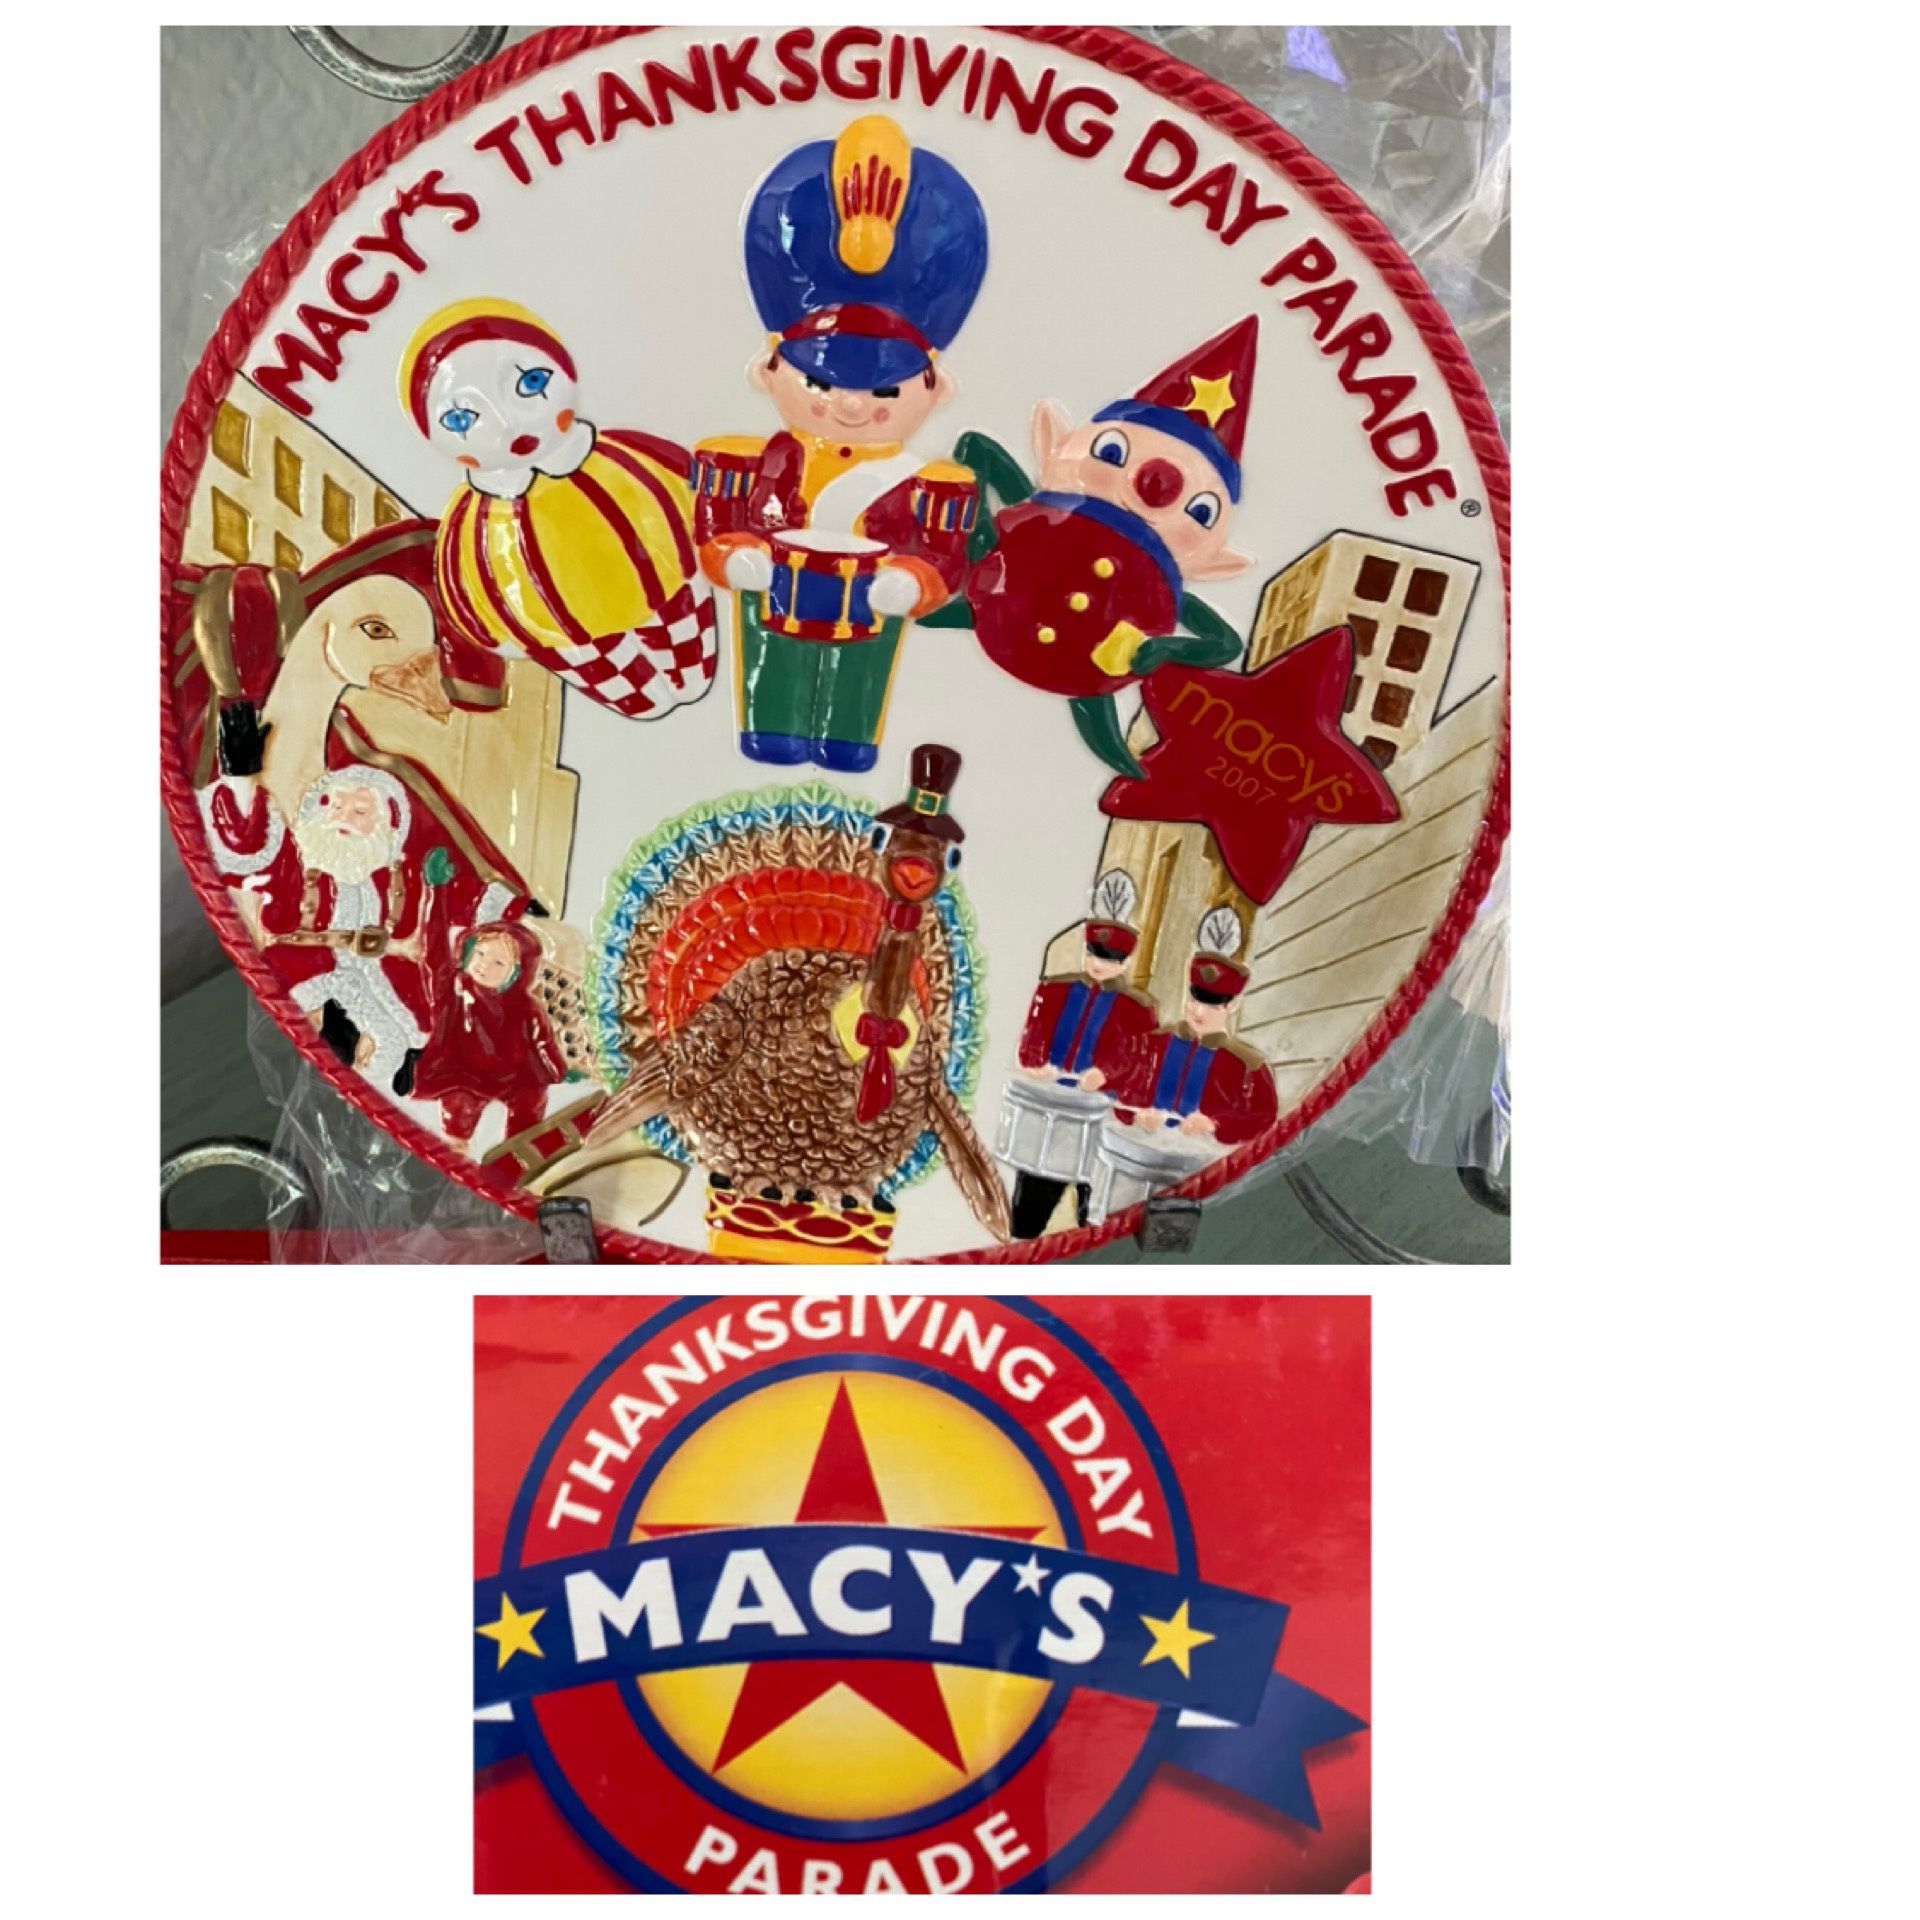 10” round FITZ & FLOYD MACY’s Thanksgiving Day Parade MINT unused in box.GORGEOUS, orig $40.